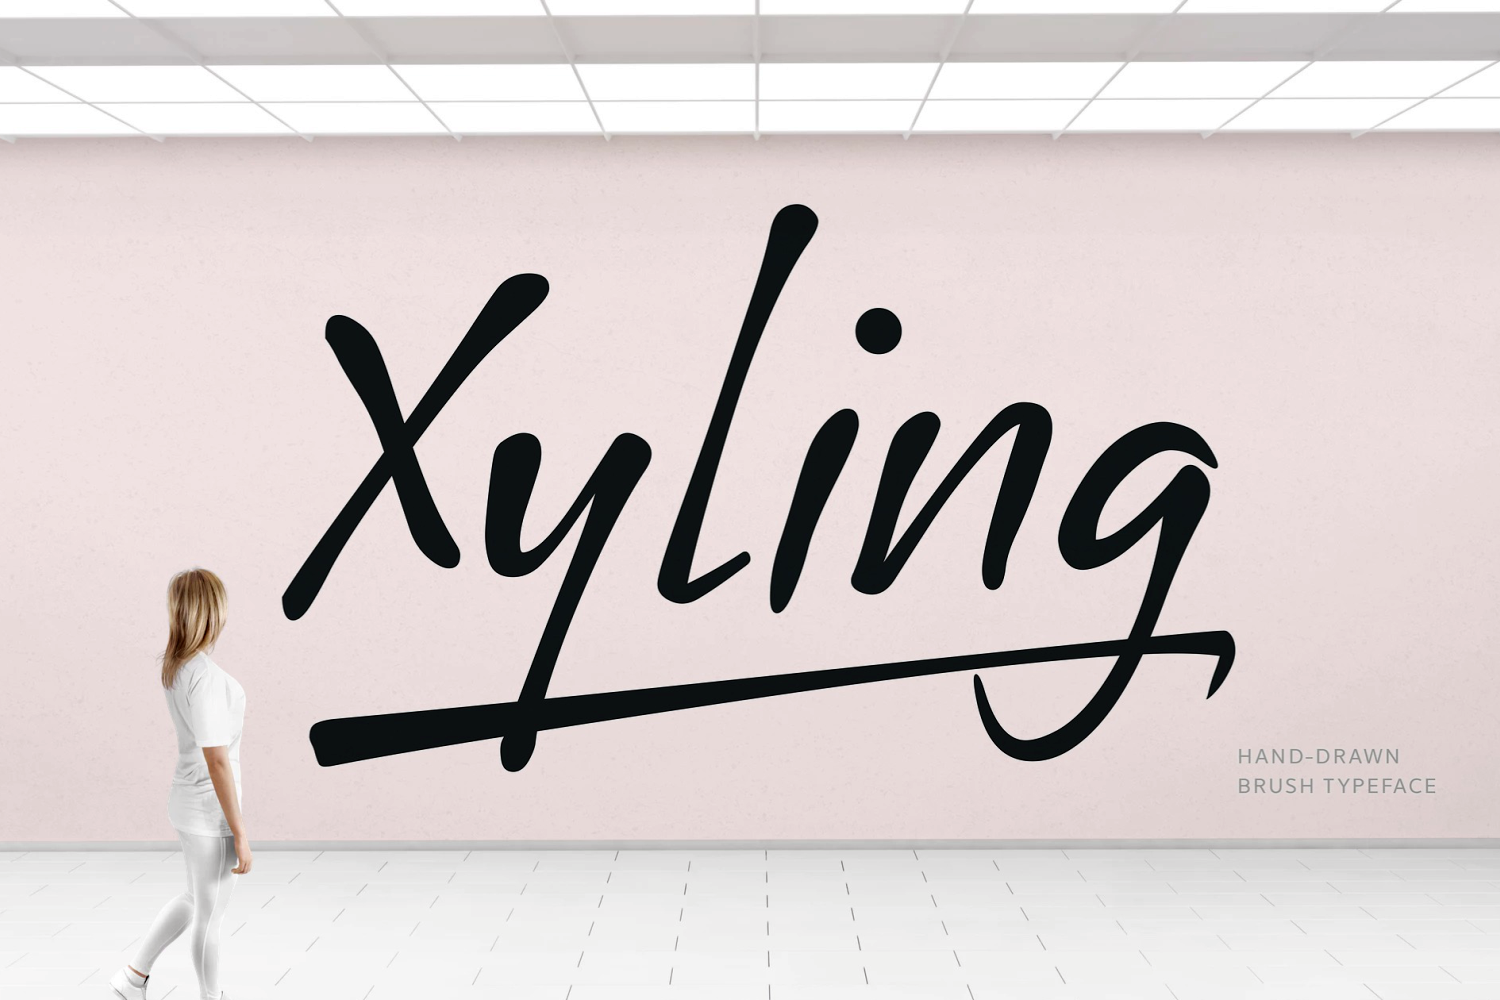 Xyling font